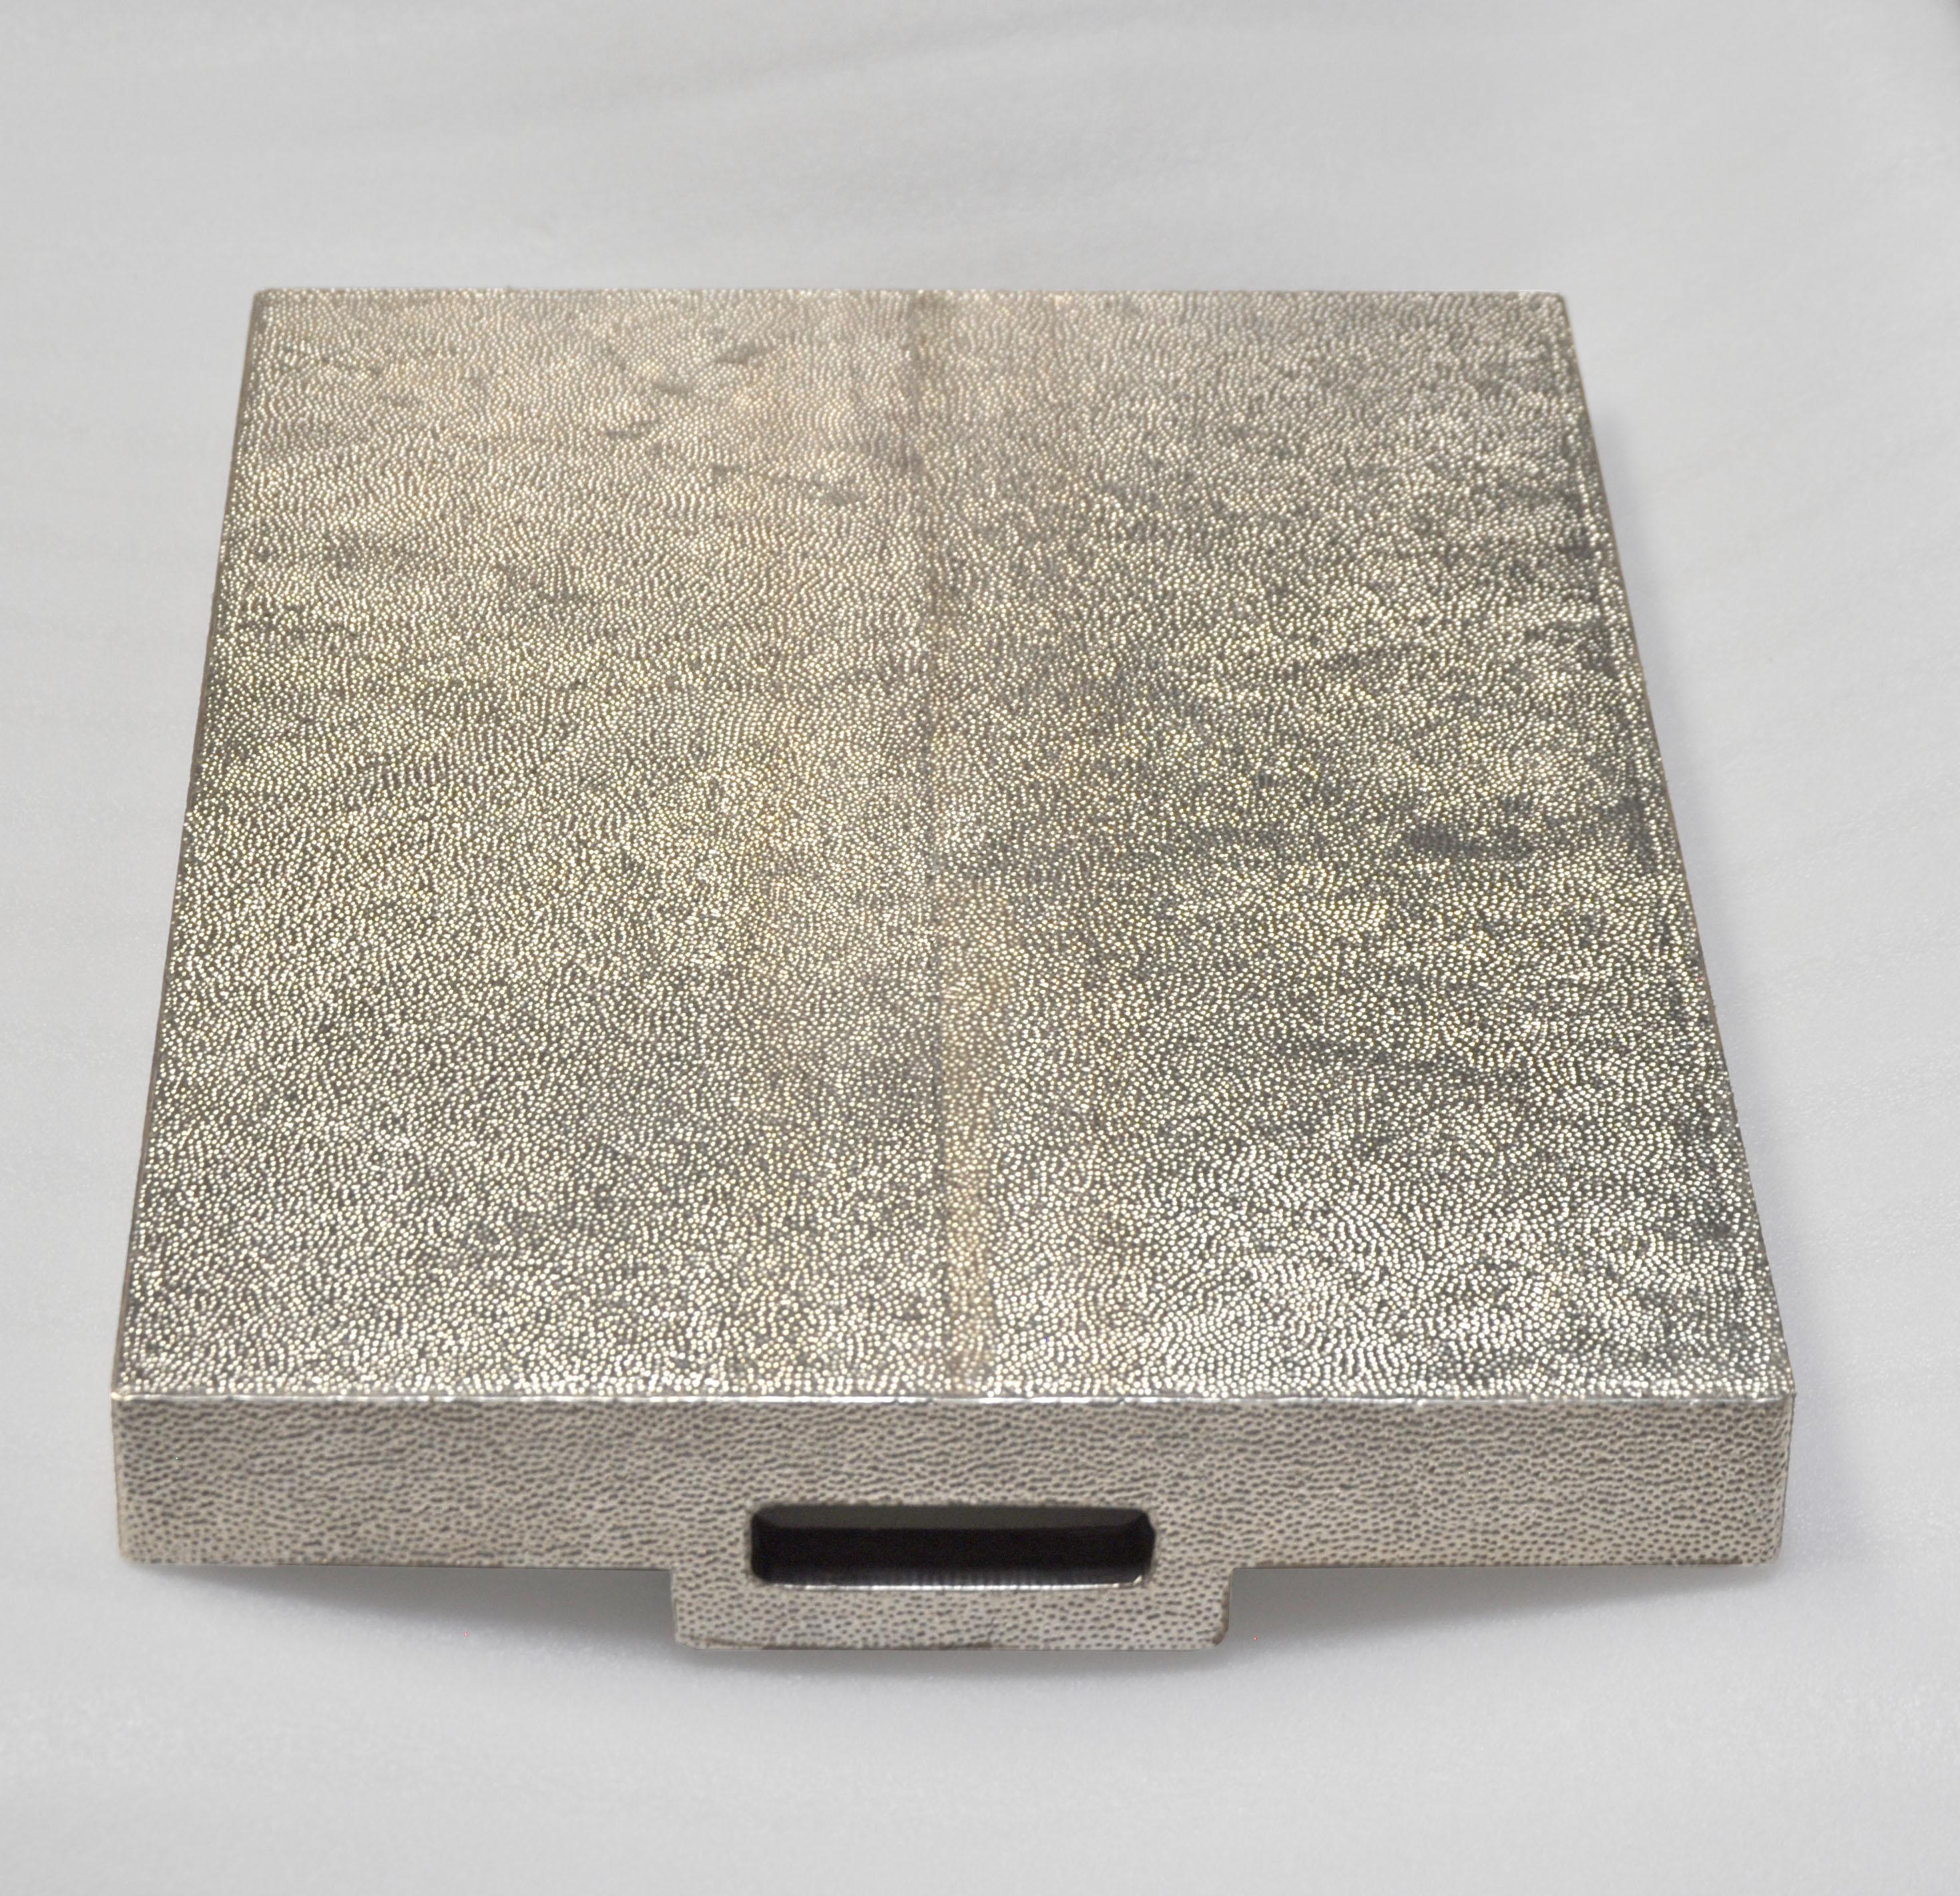 Other Rectangular Metal Tray in White Bronze Clad Over MDF by Stephanie Odegard For Sale